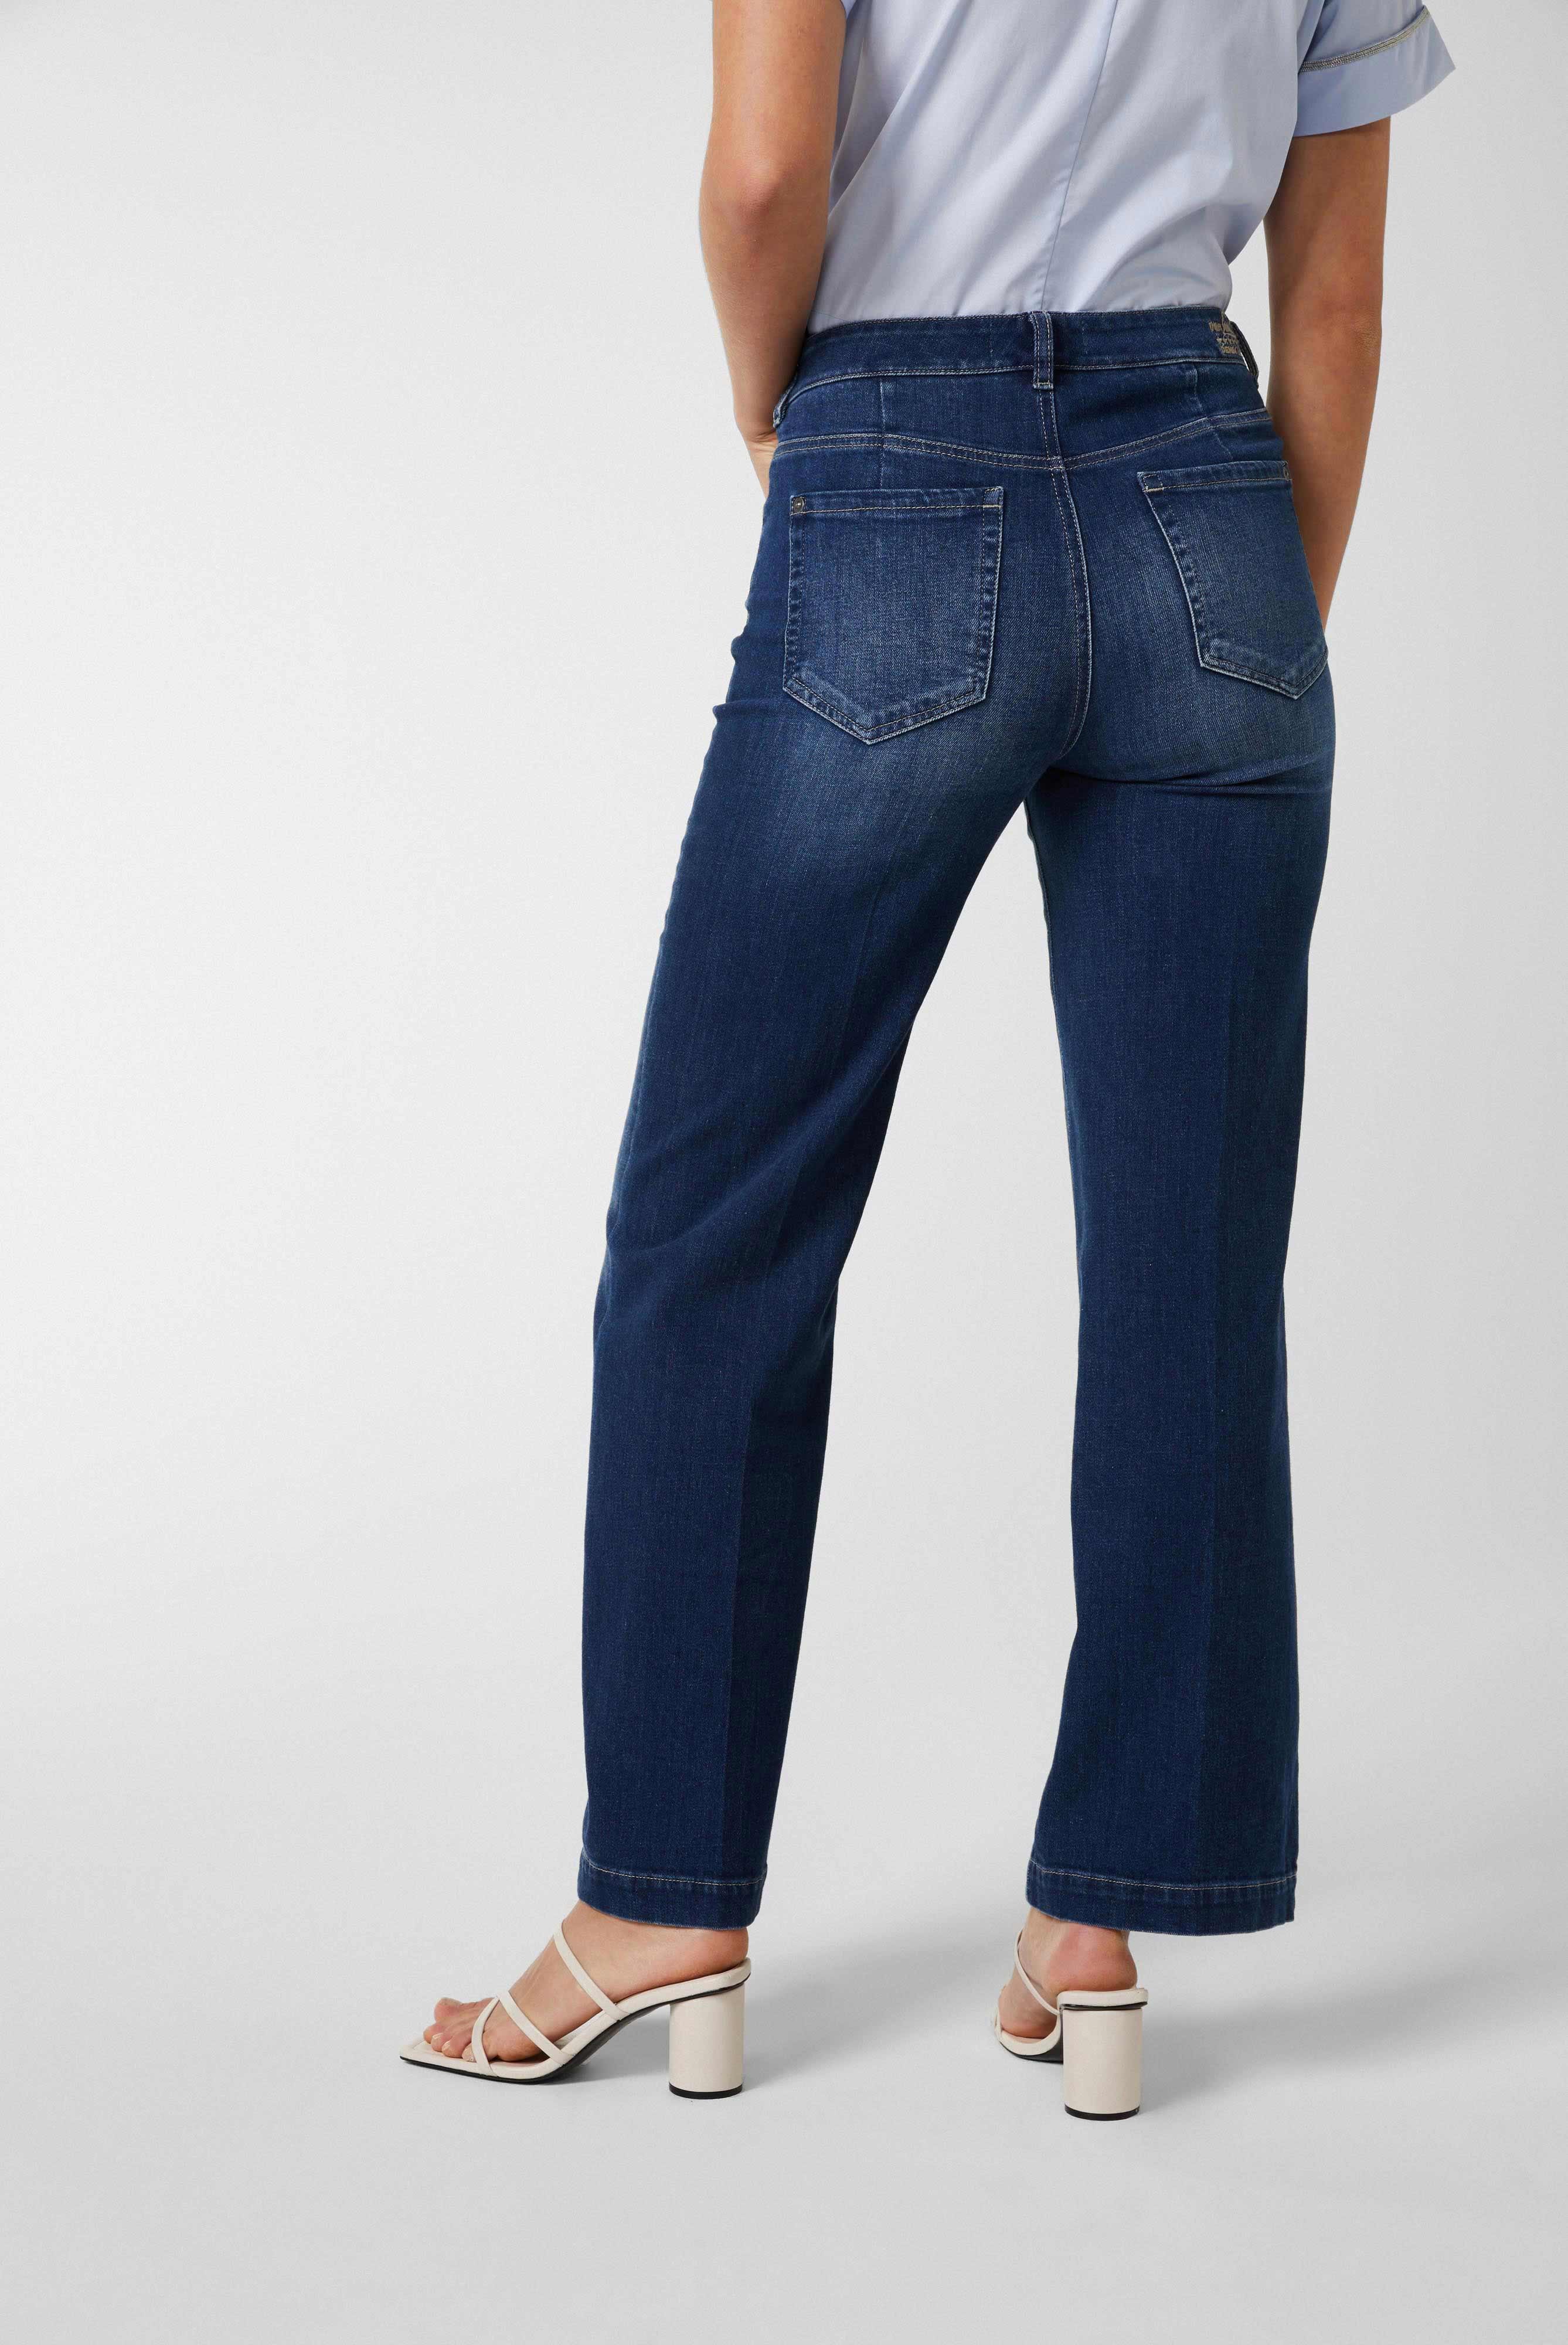 Jeans & Trousers+Cotton stretch jeans with high waist and flared leg Blue+04.657W..J00162.780.34